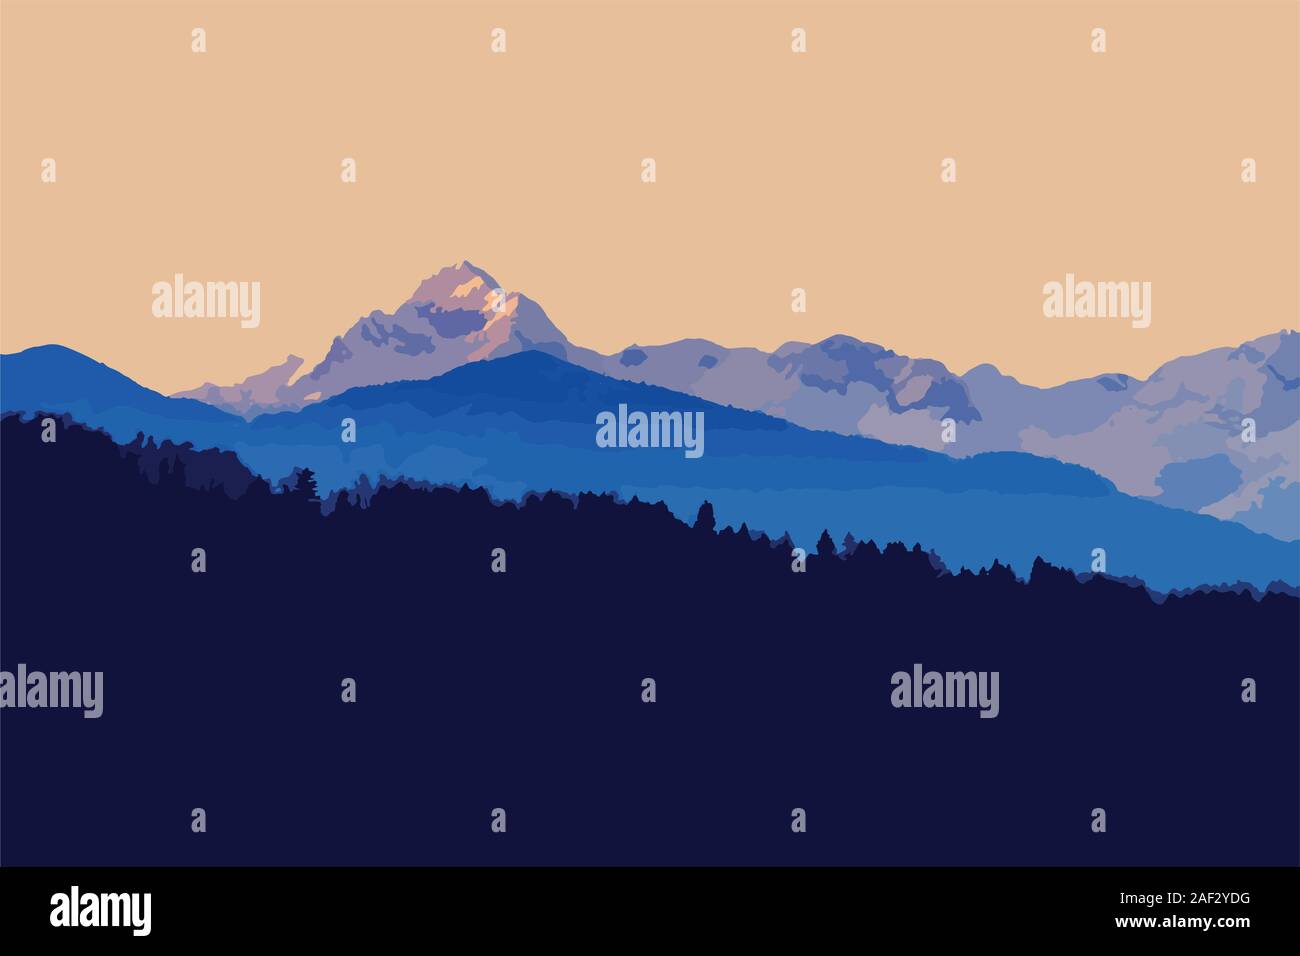 Beautiful twilight landscape with alpine peaks in background and fir forest silhouette in foreground. Landscapes, nature and mountaineering concepts. Stock Vector